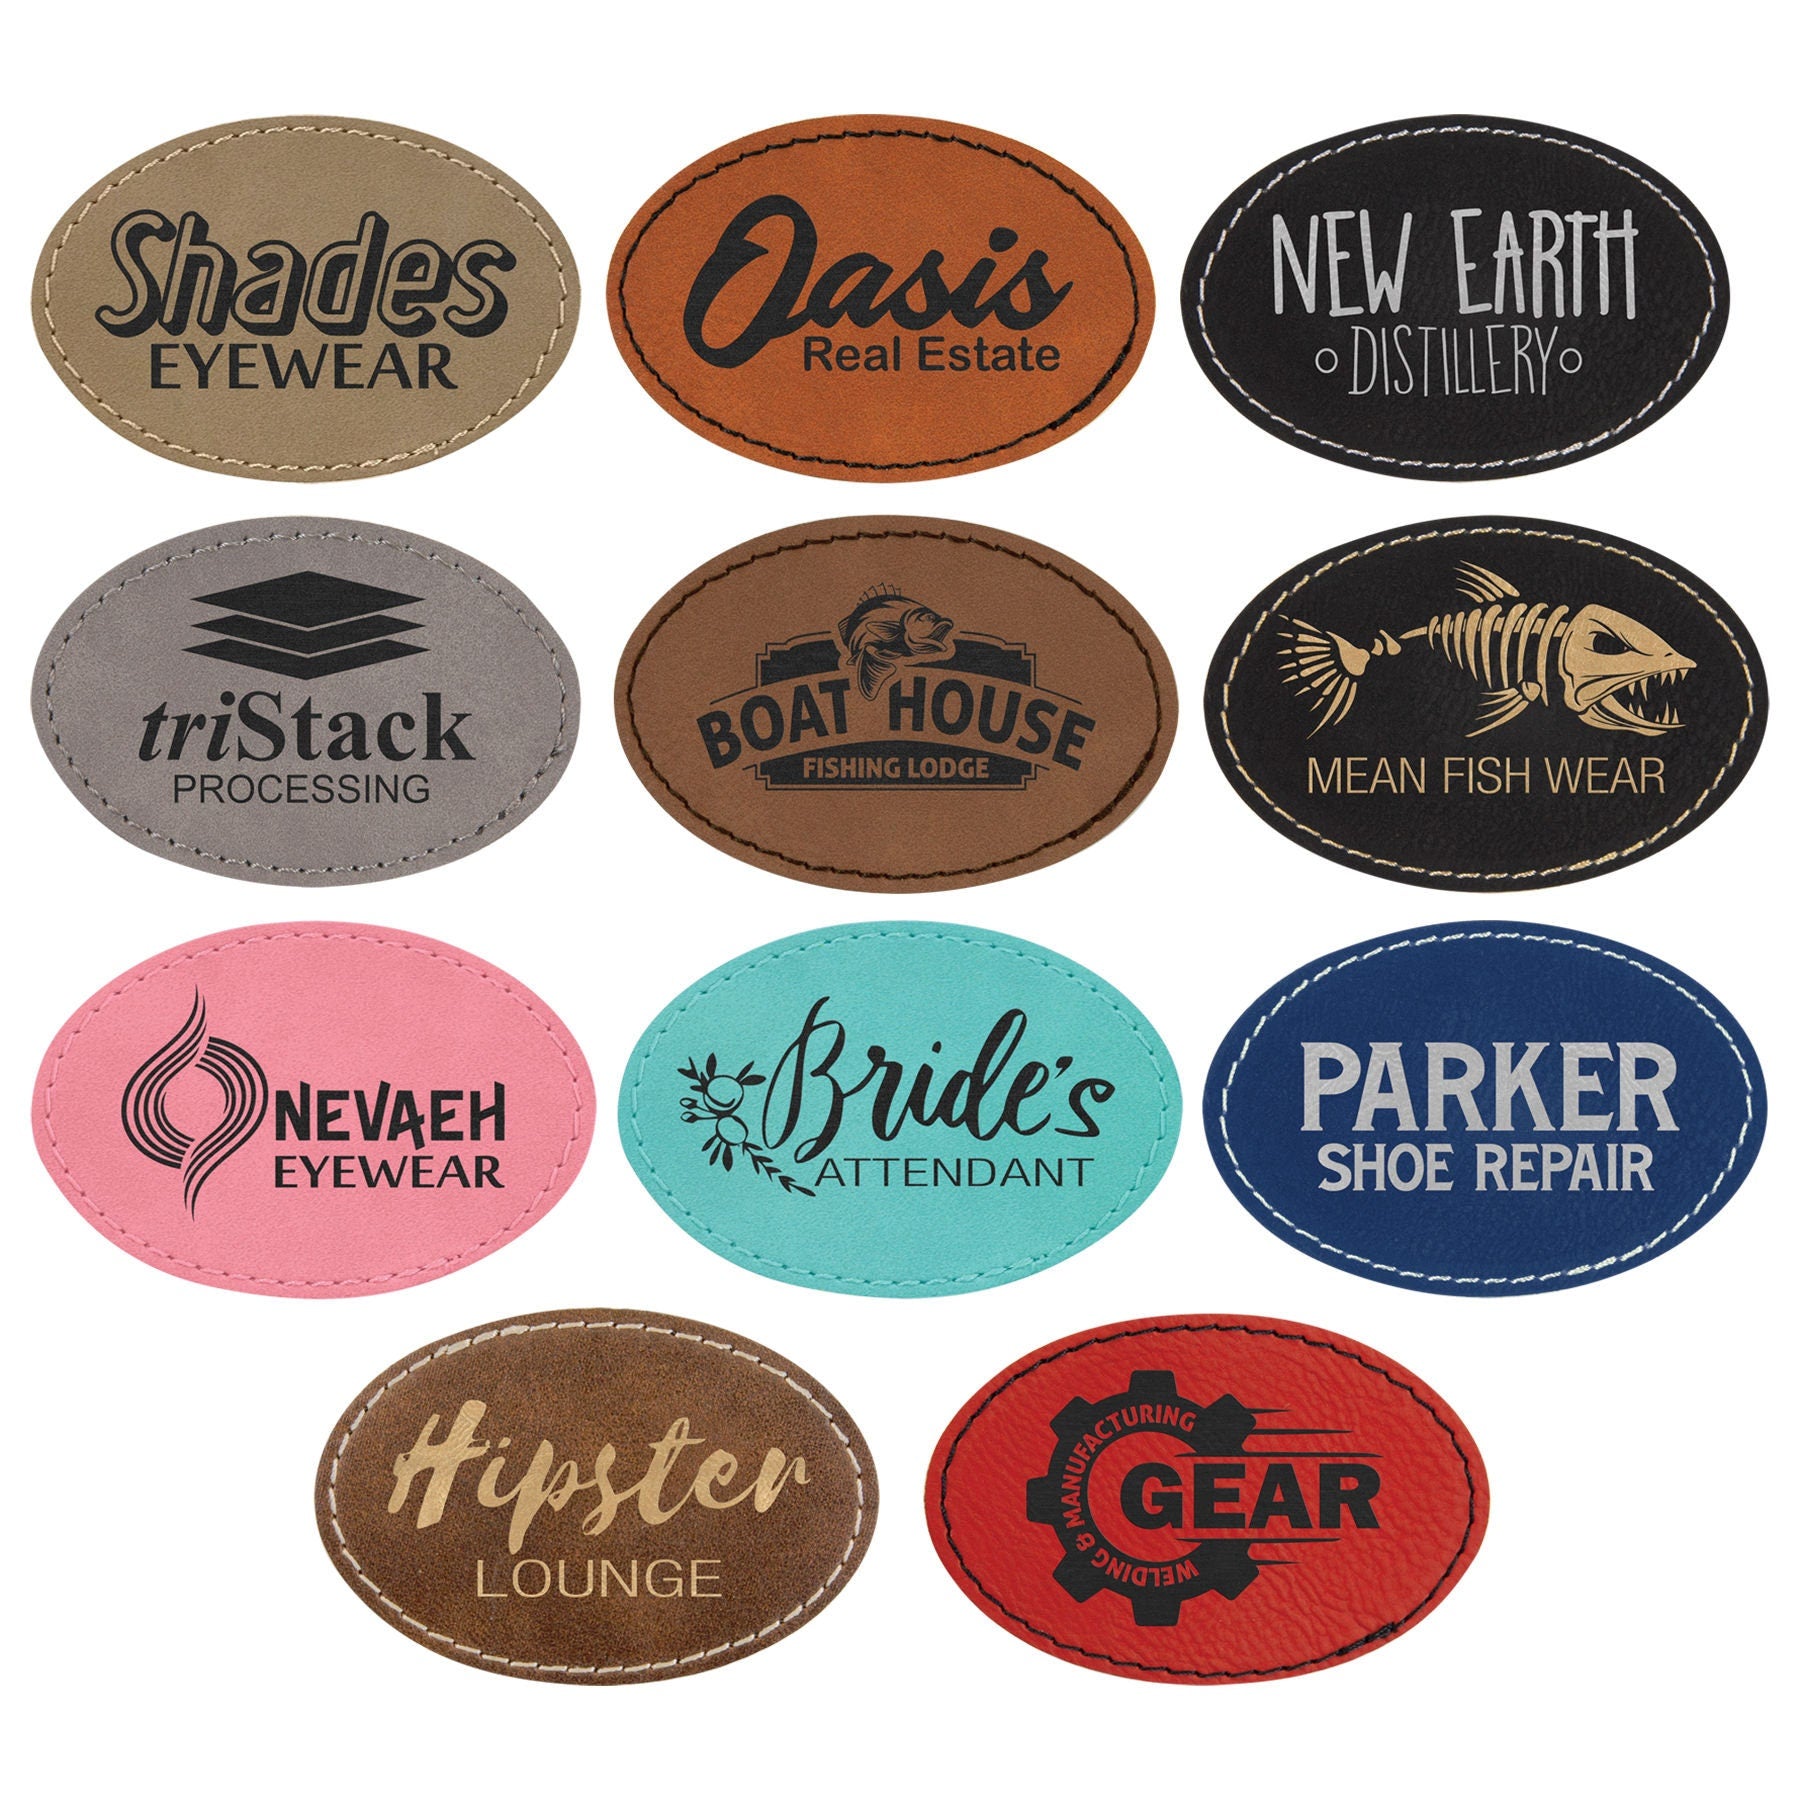 3x2 Blank Leatherette Oval Patches w/ Adhesive Backing